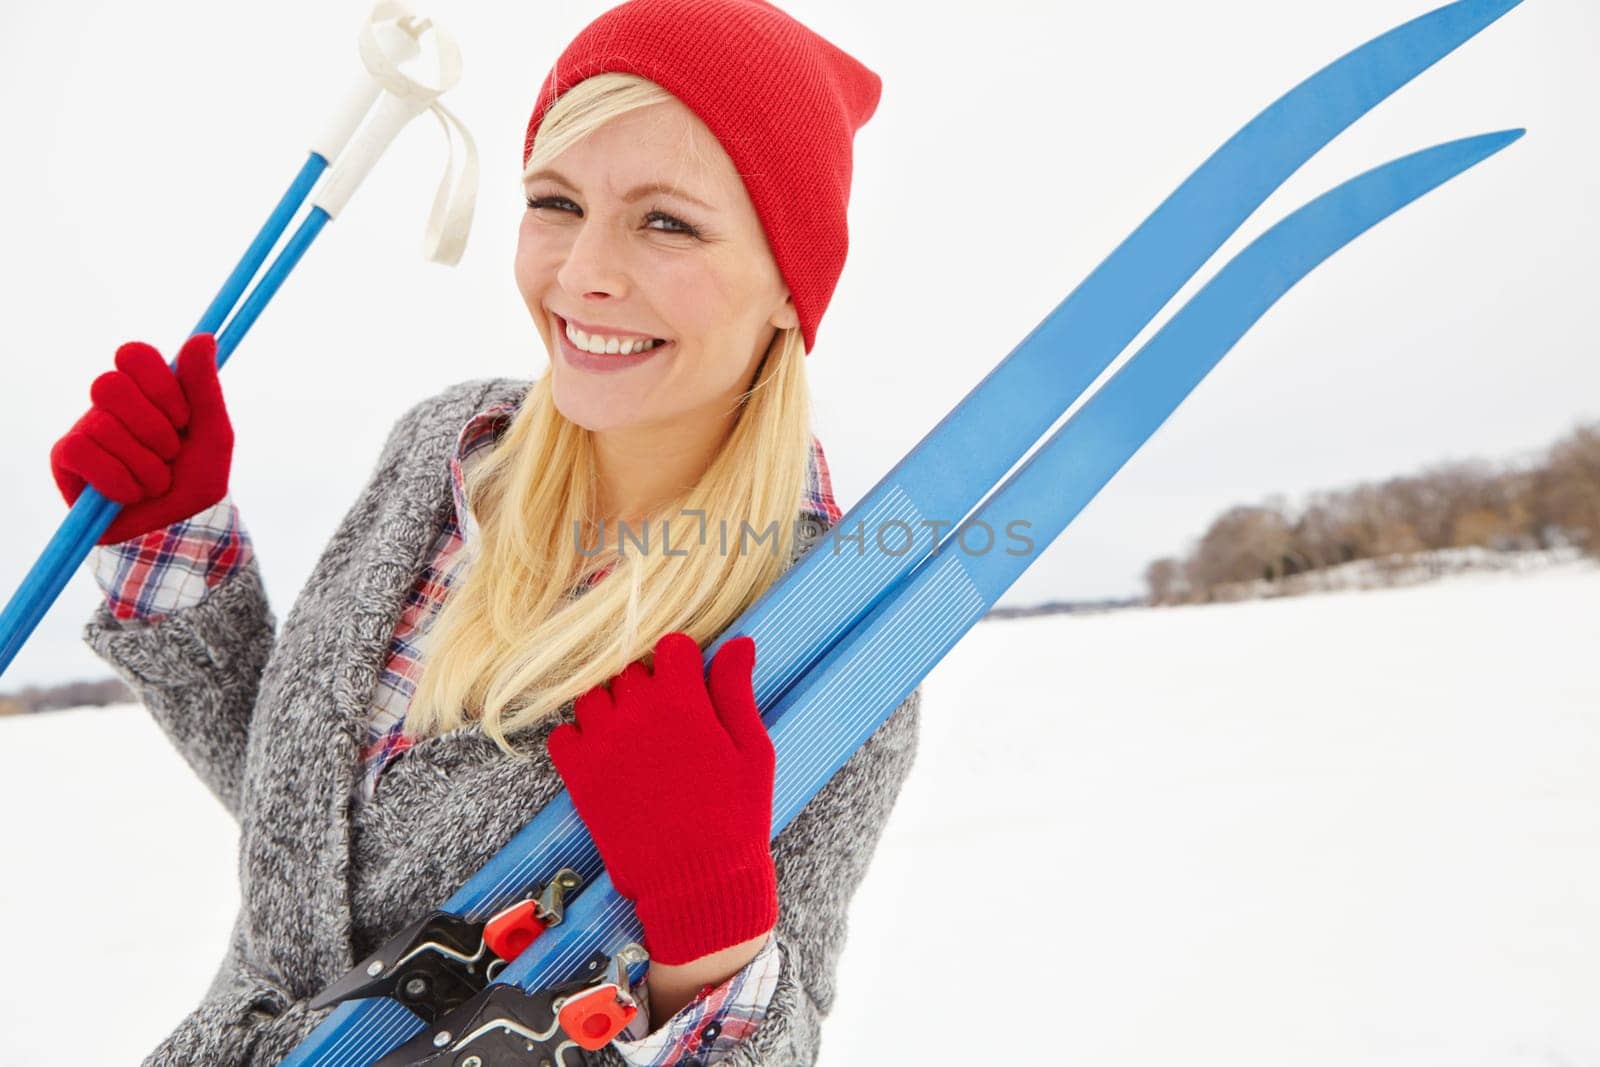 Woman, portrait and happy on vacation with ski equipment for alpine adventure, fun and exploring snowy wilderness. Girl, smile and outdoor on winter holiday in Alaska for getaway and travel tour